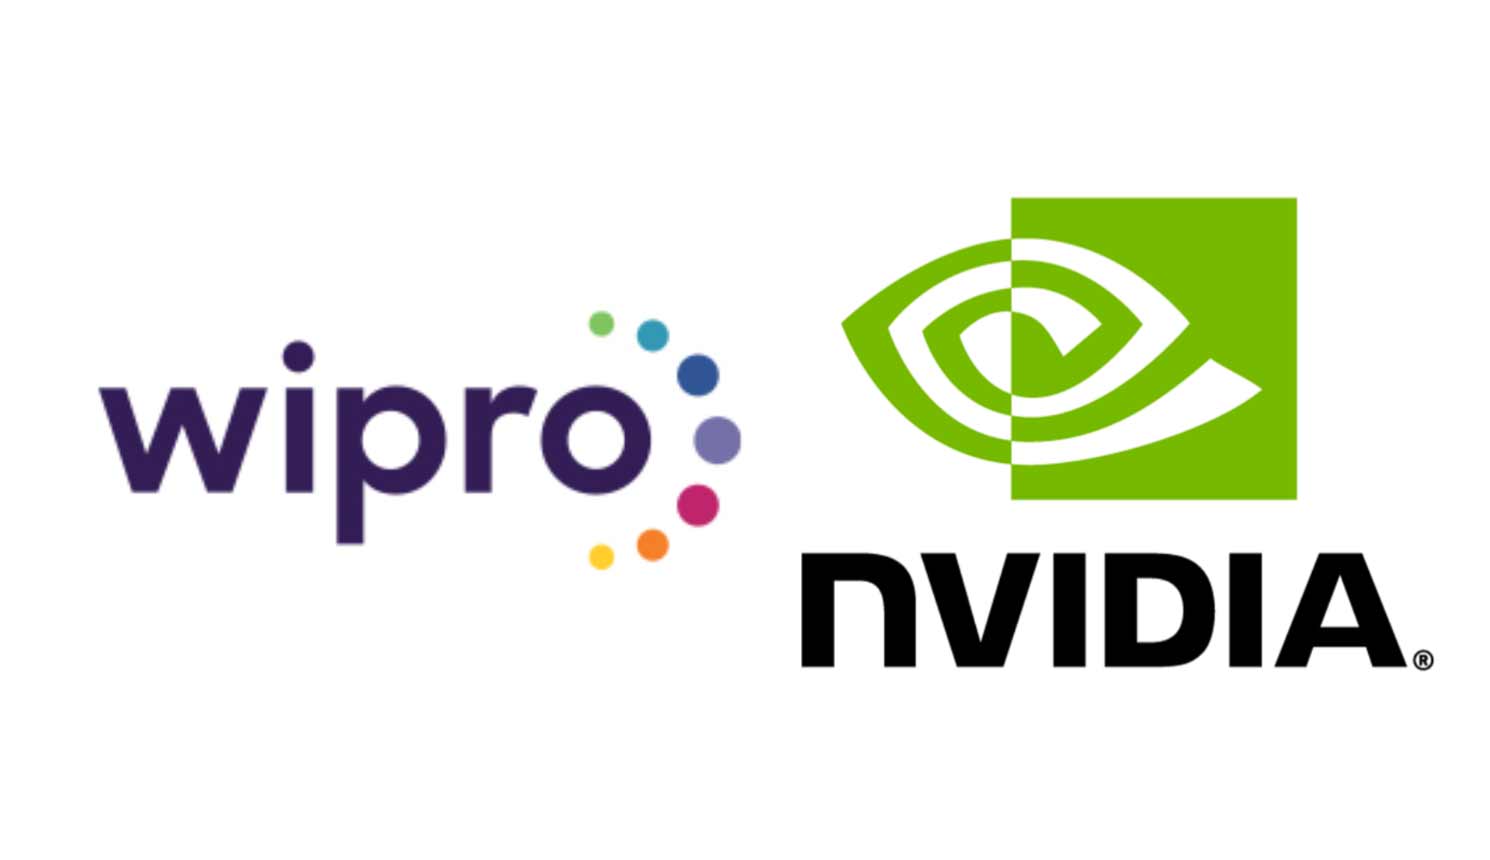 Wipro, NVIDIA to Boost Healthcare Sector With Gen AI